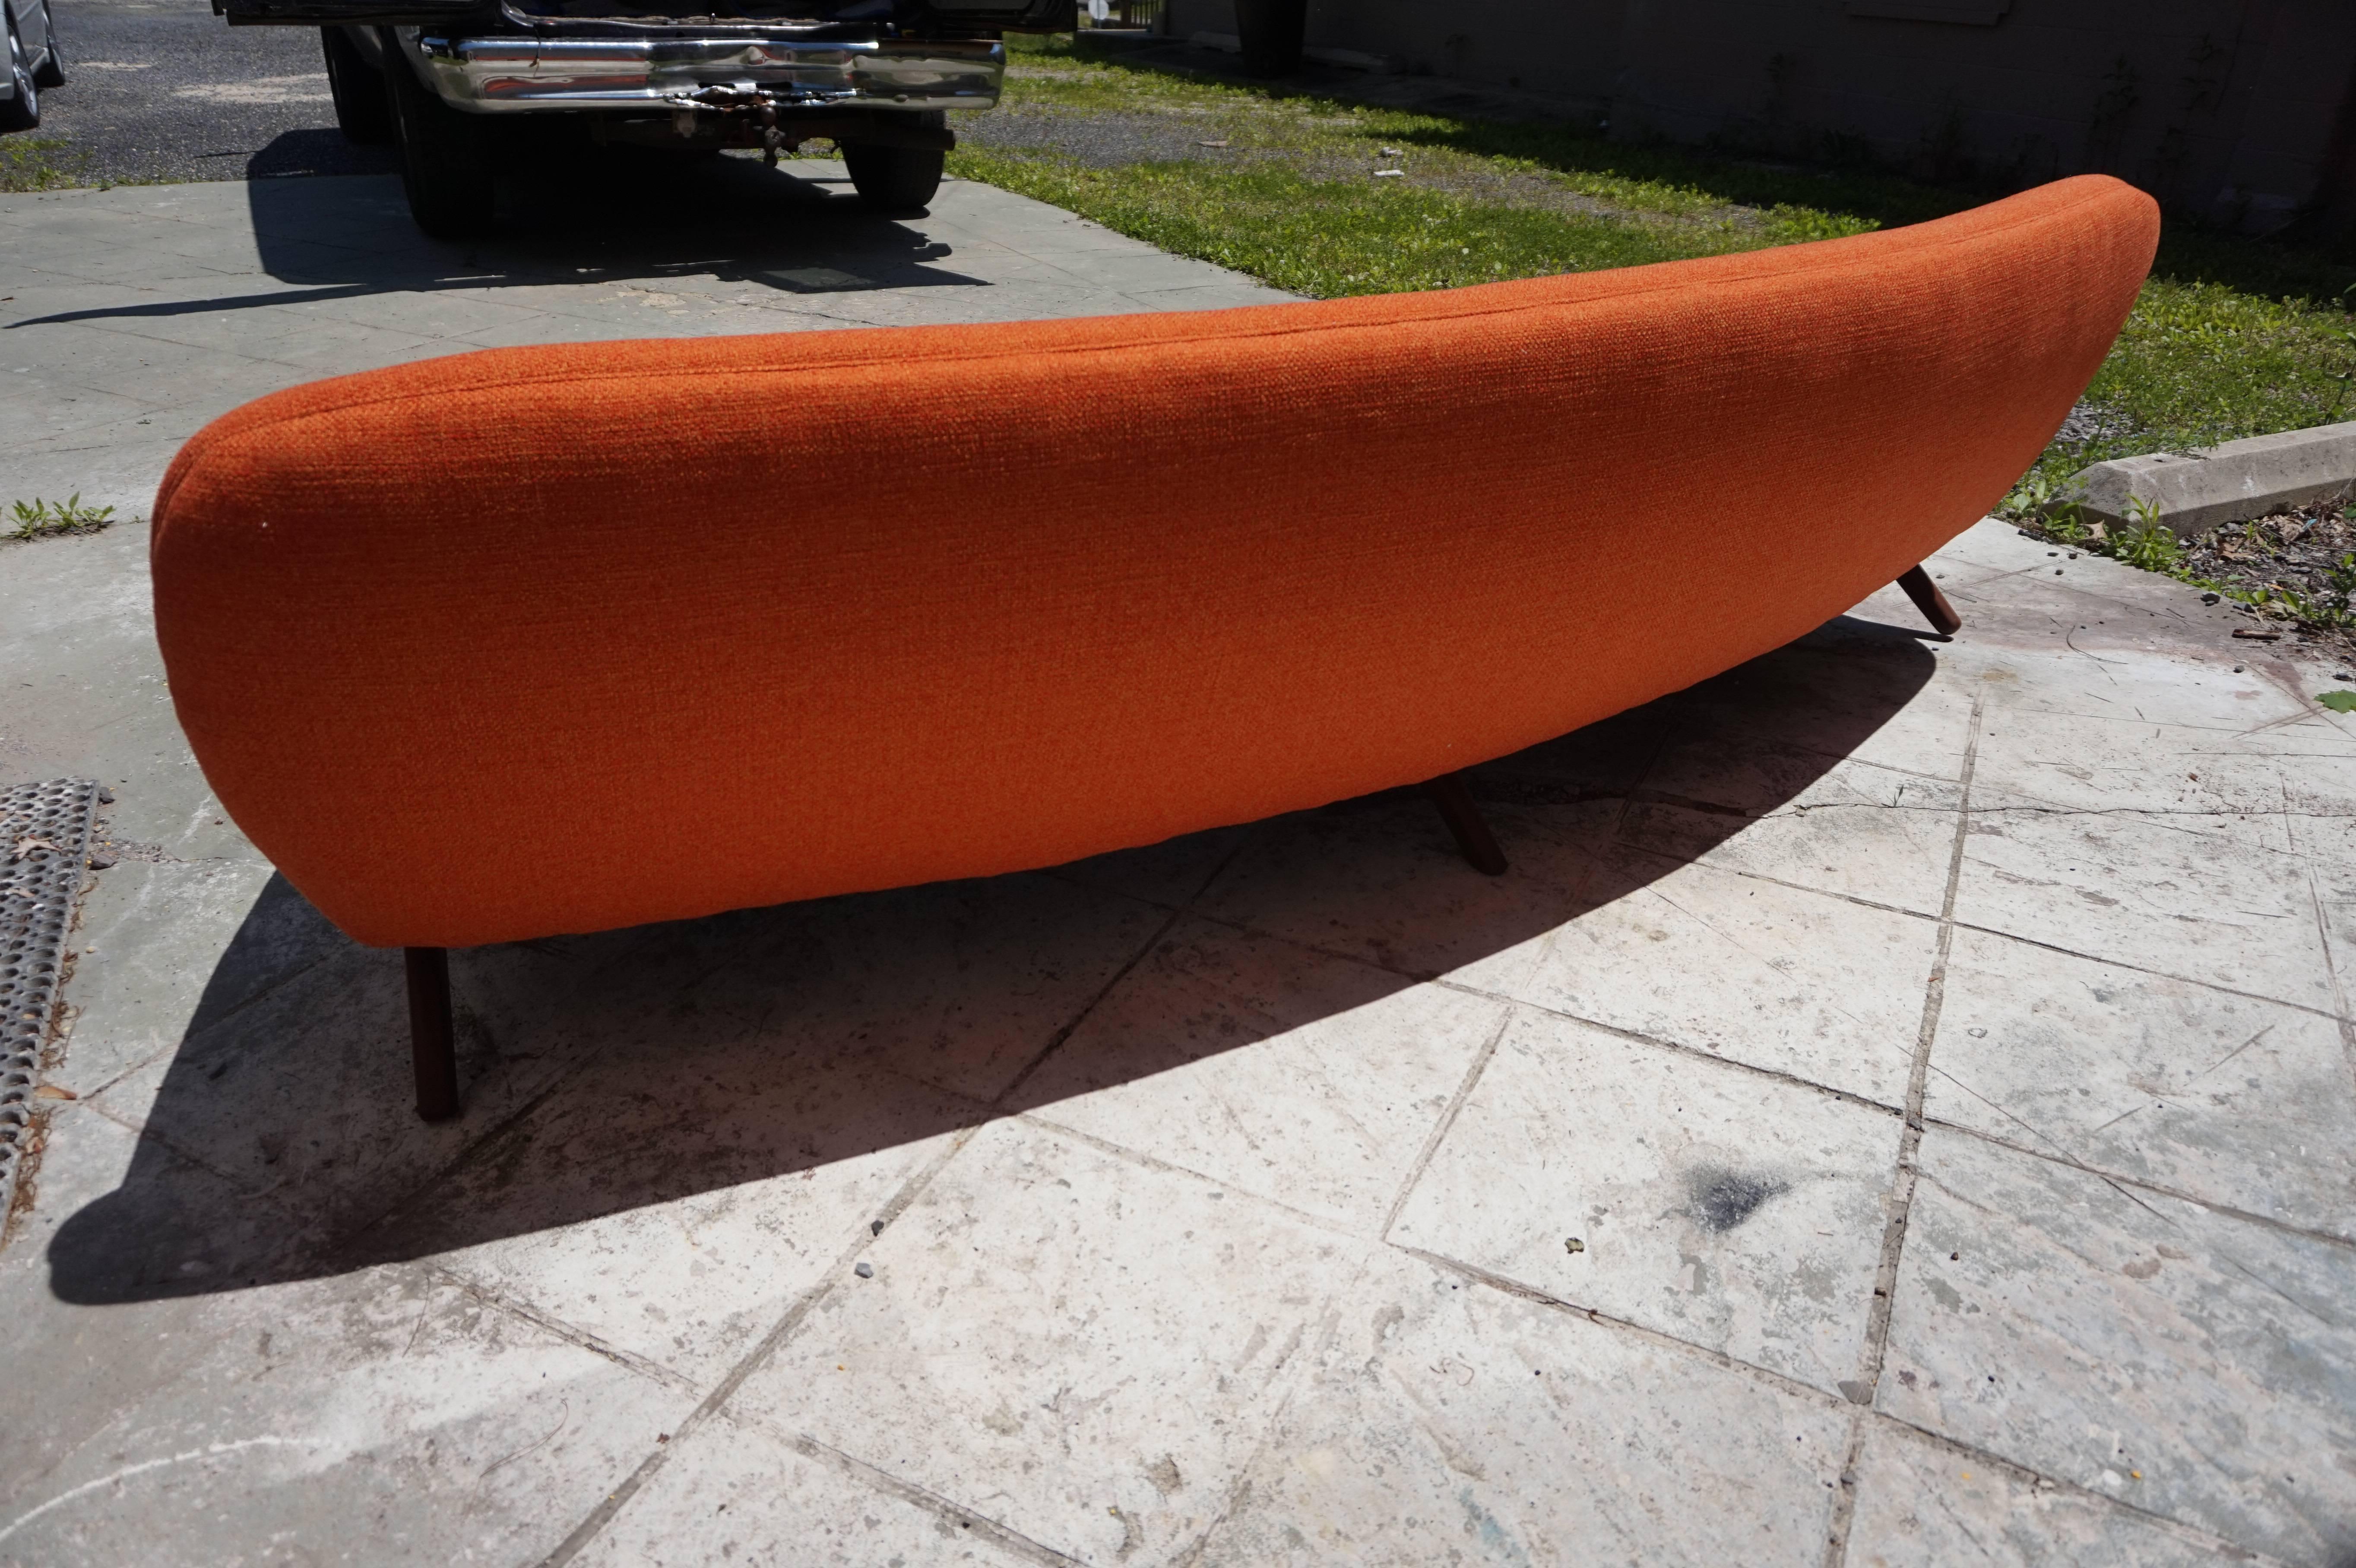 Outstanding Danish Modern Leif Hansen style curved sofa with amazing walnut legs. This sofa is in fantastic condition with brand new Sunset orange woven fabric-just gorgeous! All new foam and straps-this sofa is ready to slip right in your swanky